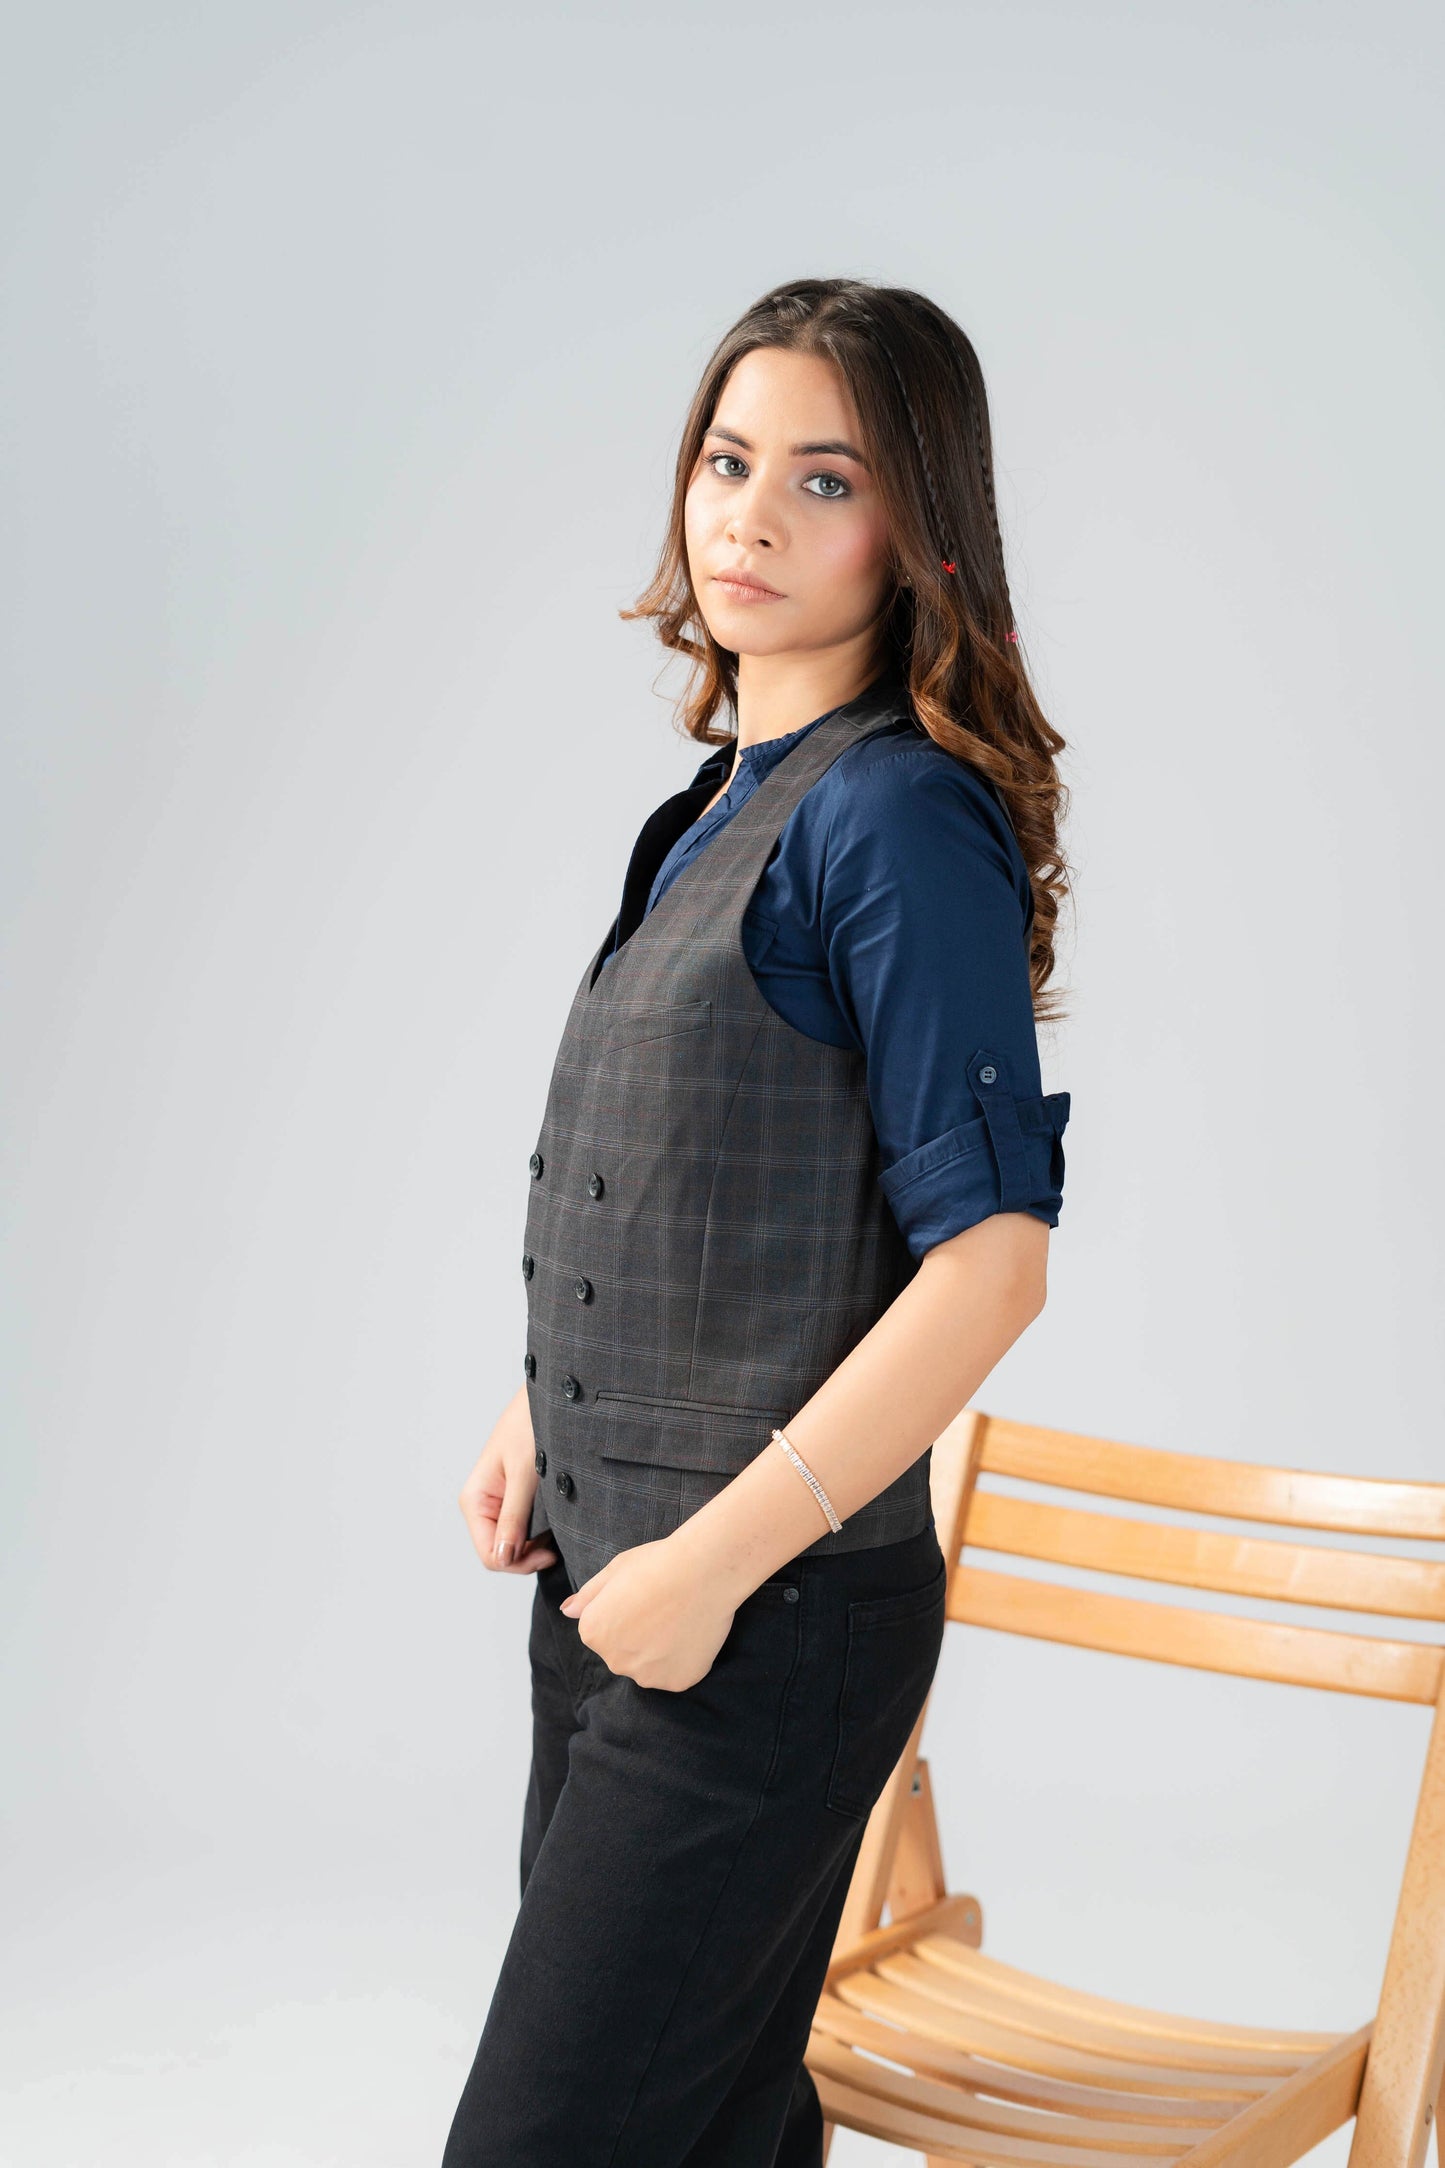 HM Women's Authentic Checked Waistcoat with Pockets 🧥🕴️🔥 Women's Waistcoat First Choice 